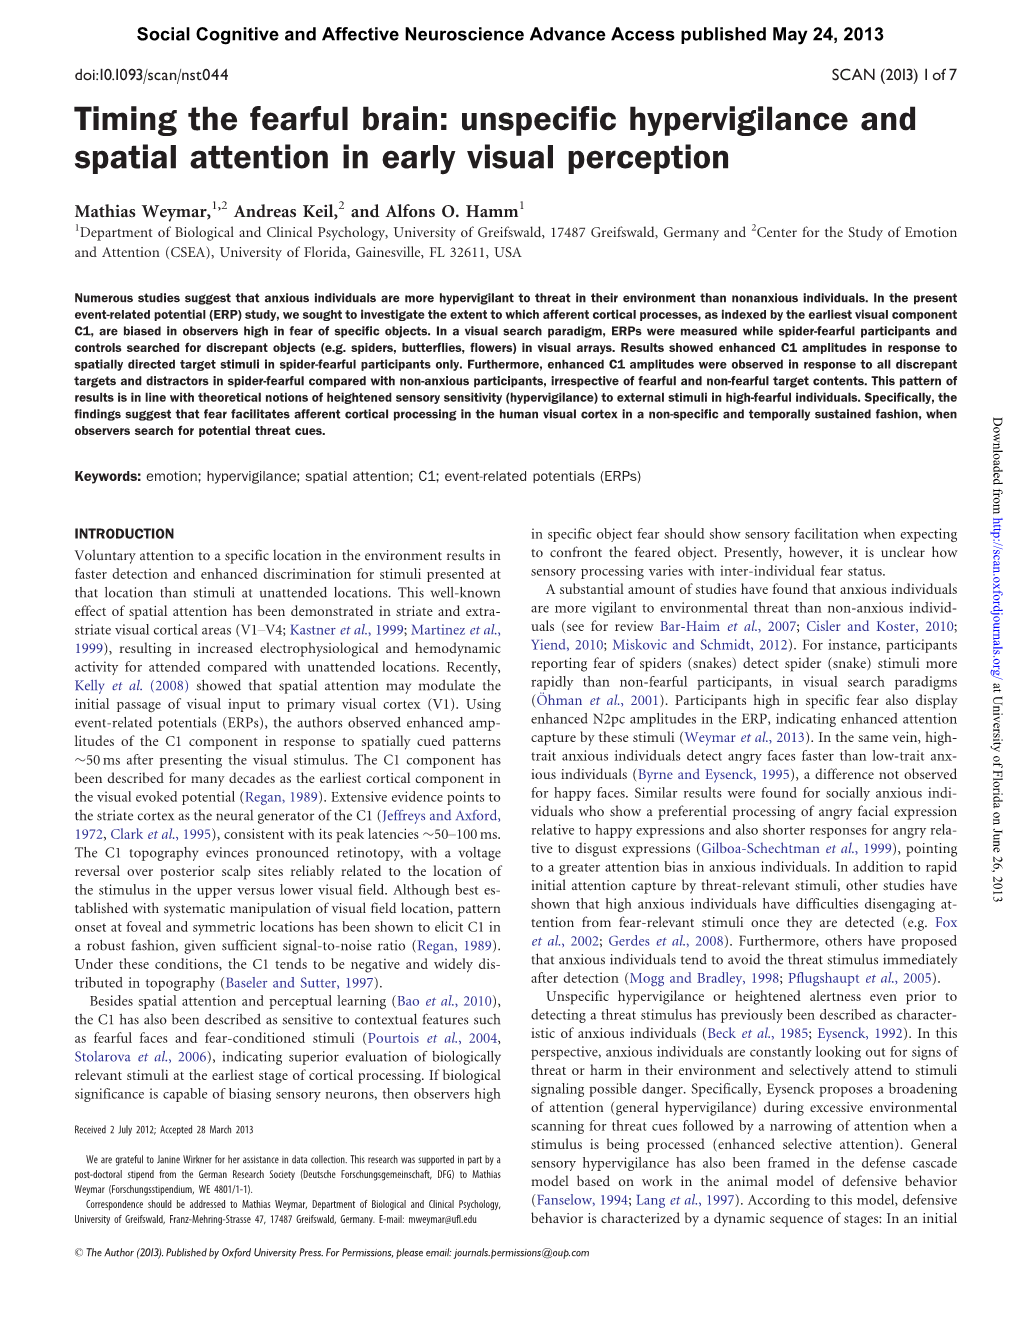 Unspecific Hypervigilance and Spatial Attention in Early Visual Perception